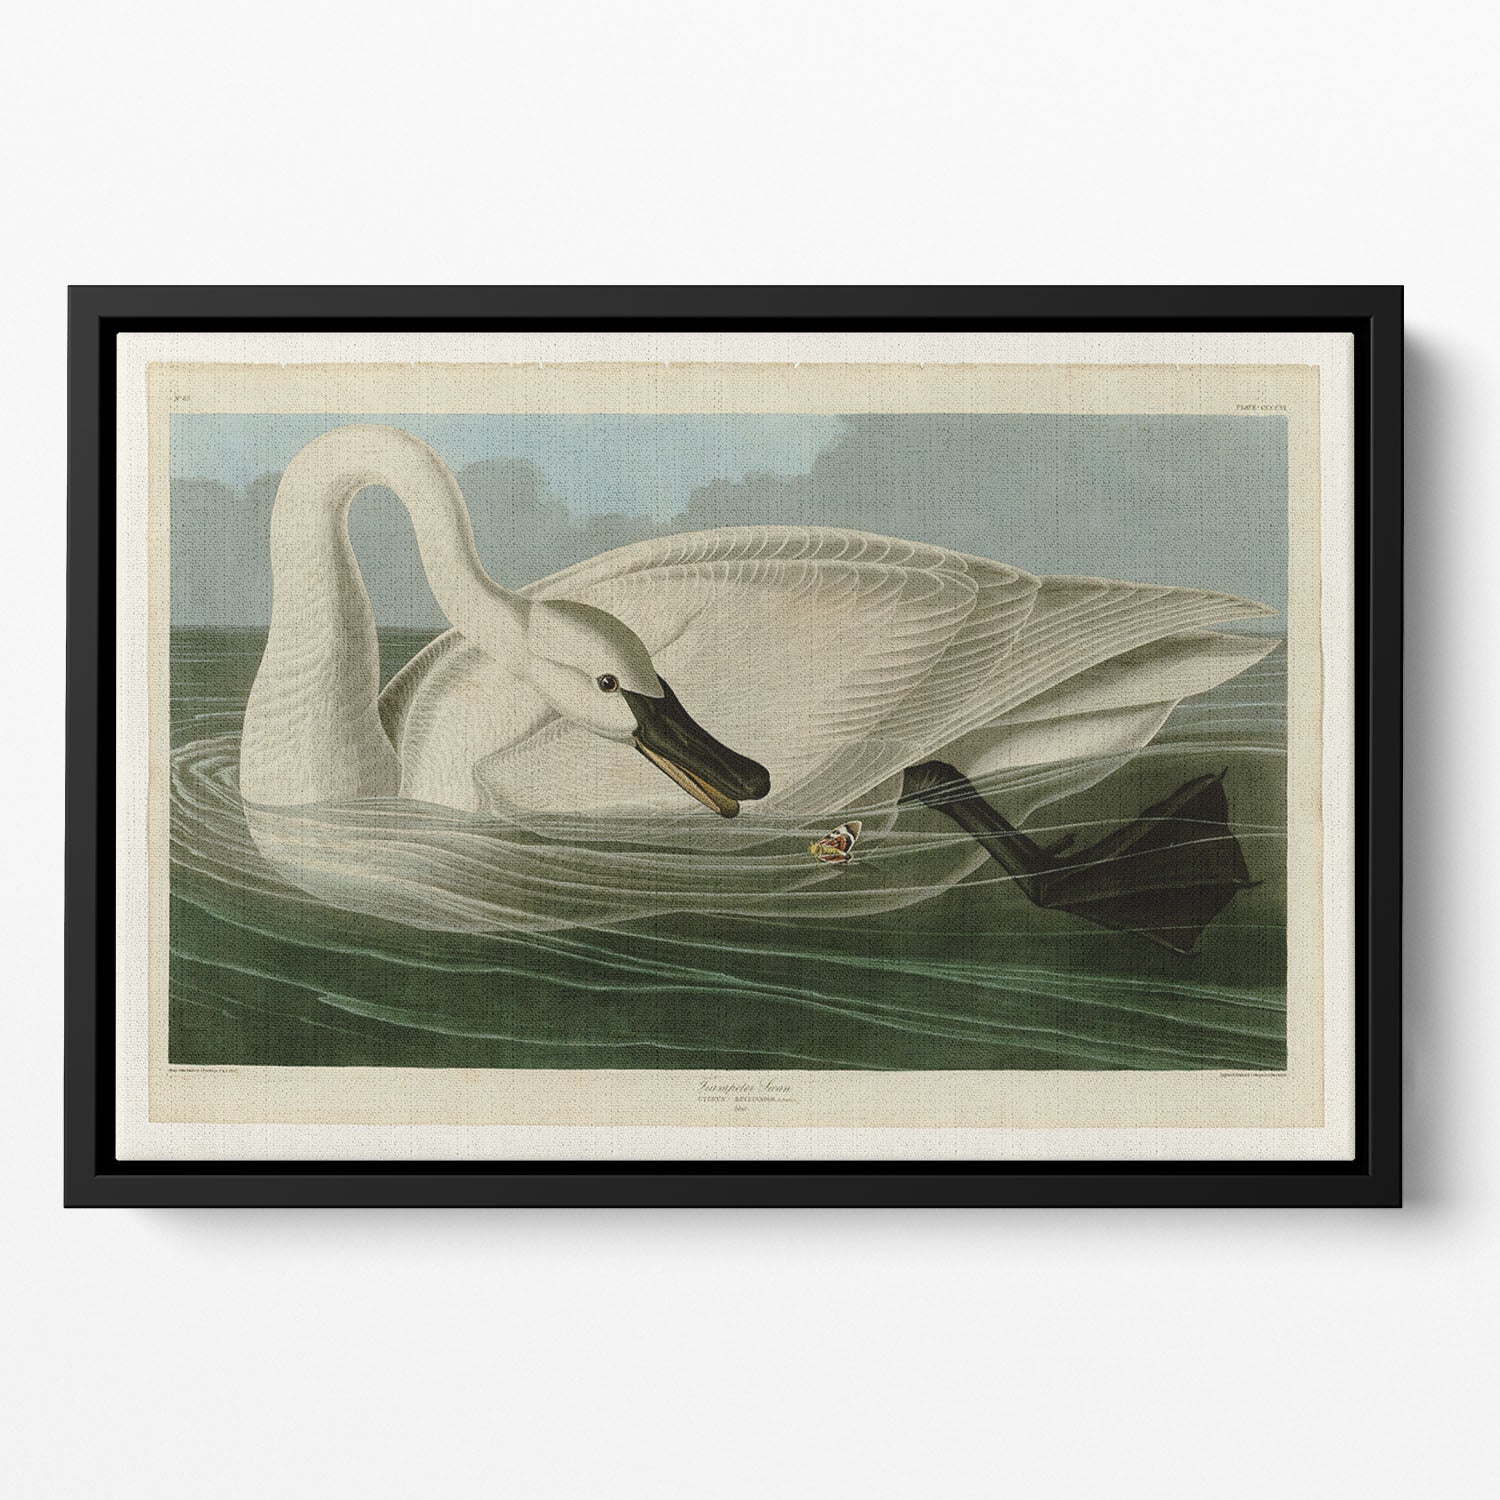 Trumpeter Swan by Audubon Floating Framed Canvas